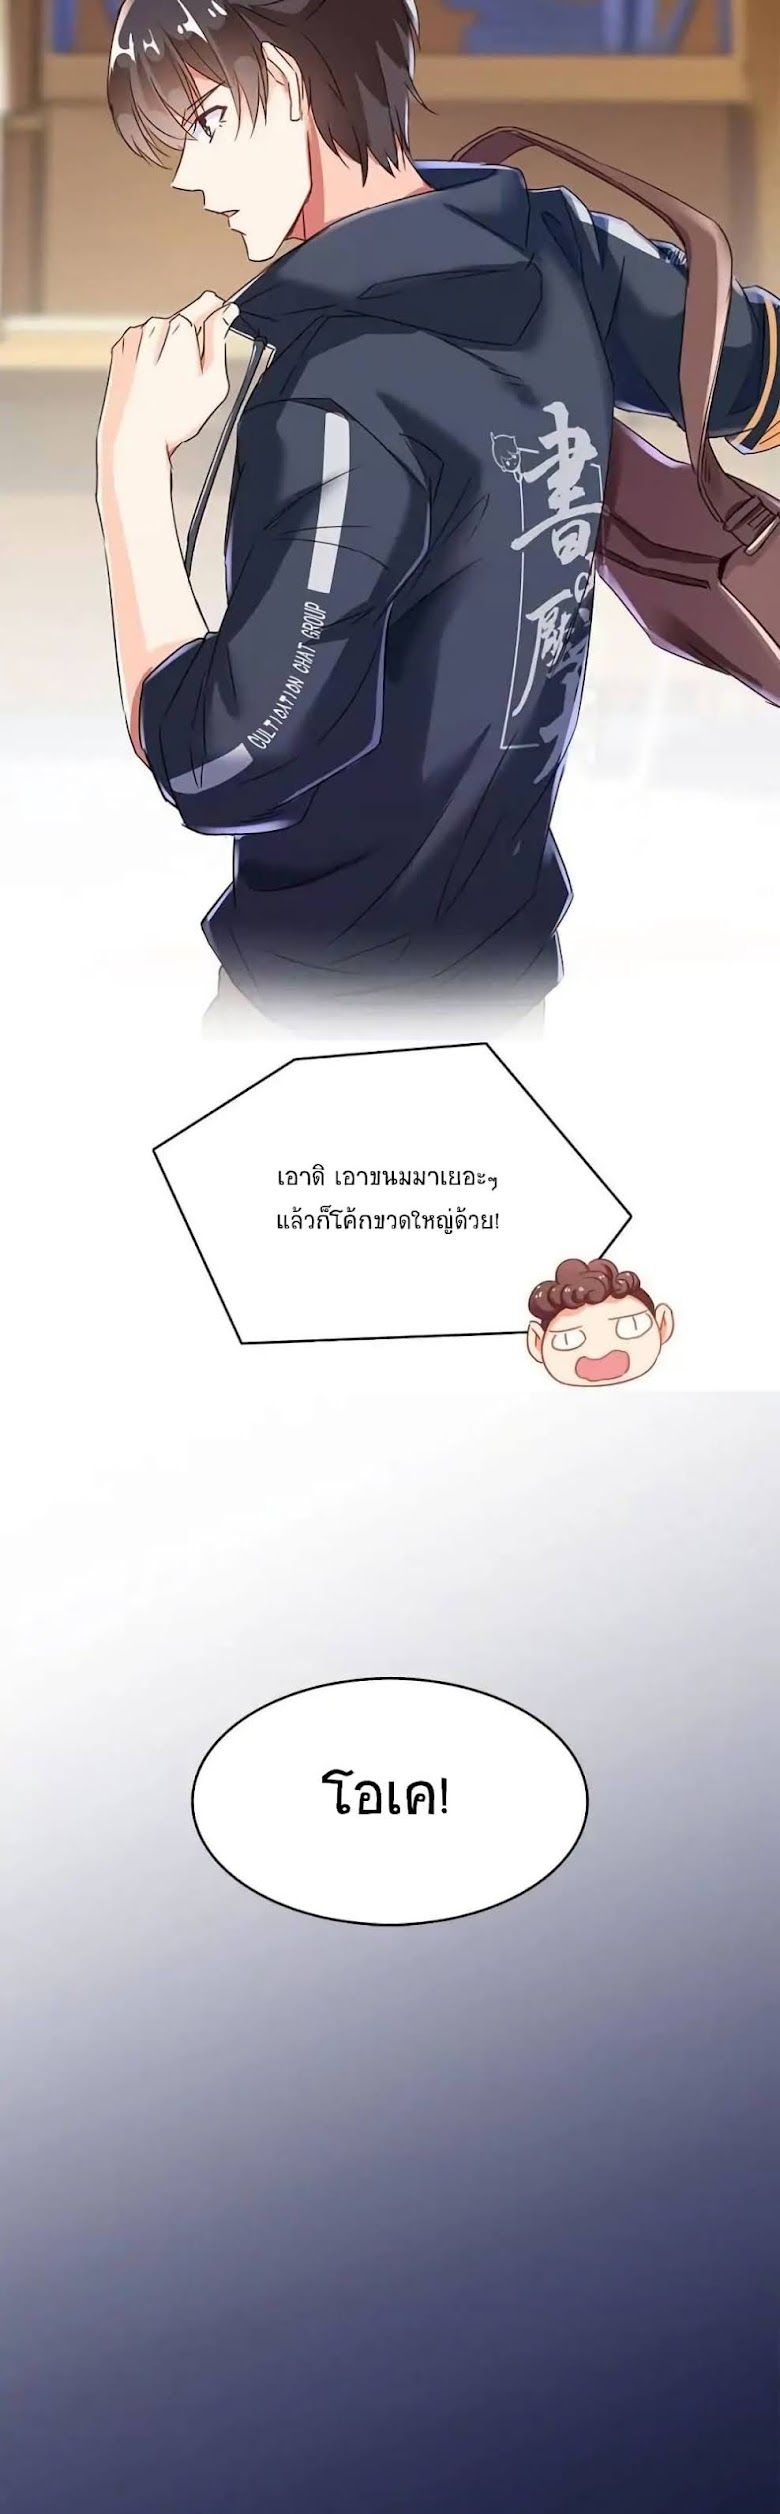 Cultivation Chat Group - หน้า 5